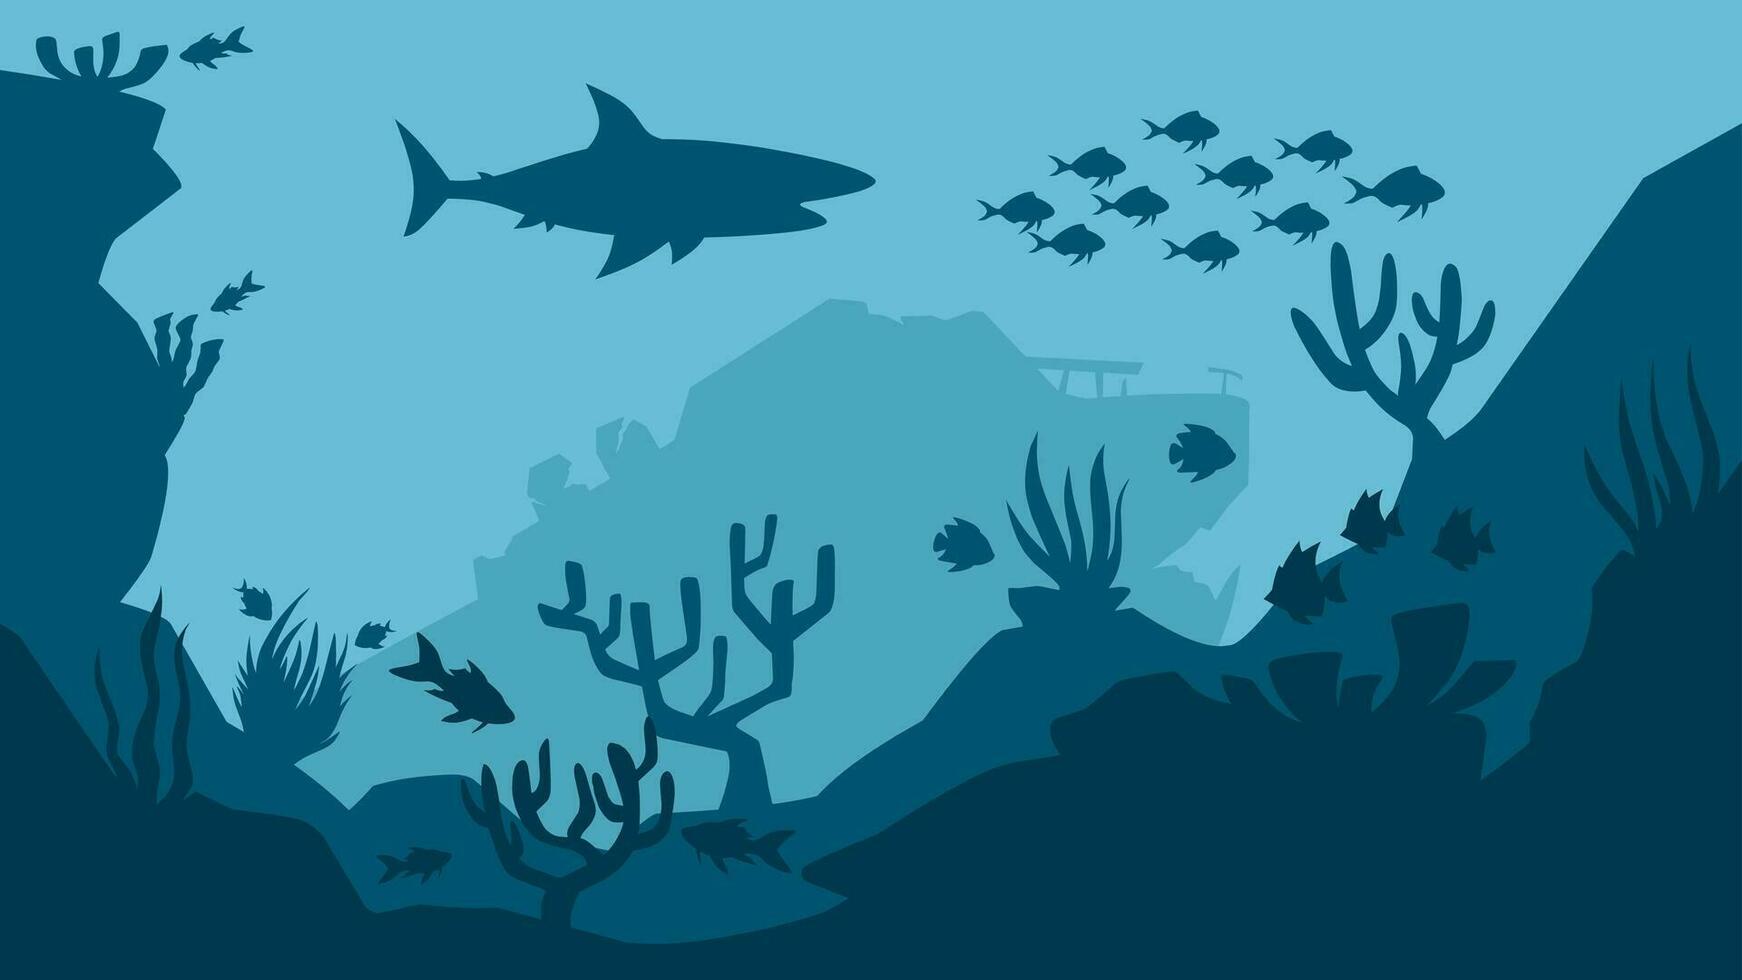 Underwater seascape vector illustration. Deep sea landscape with shipwreck, fish and coral reef. Undersea landscape for illustration, background or wallpaper